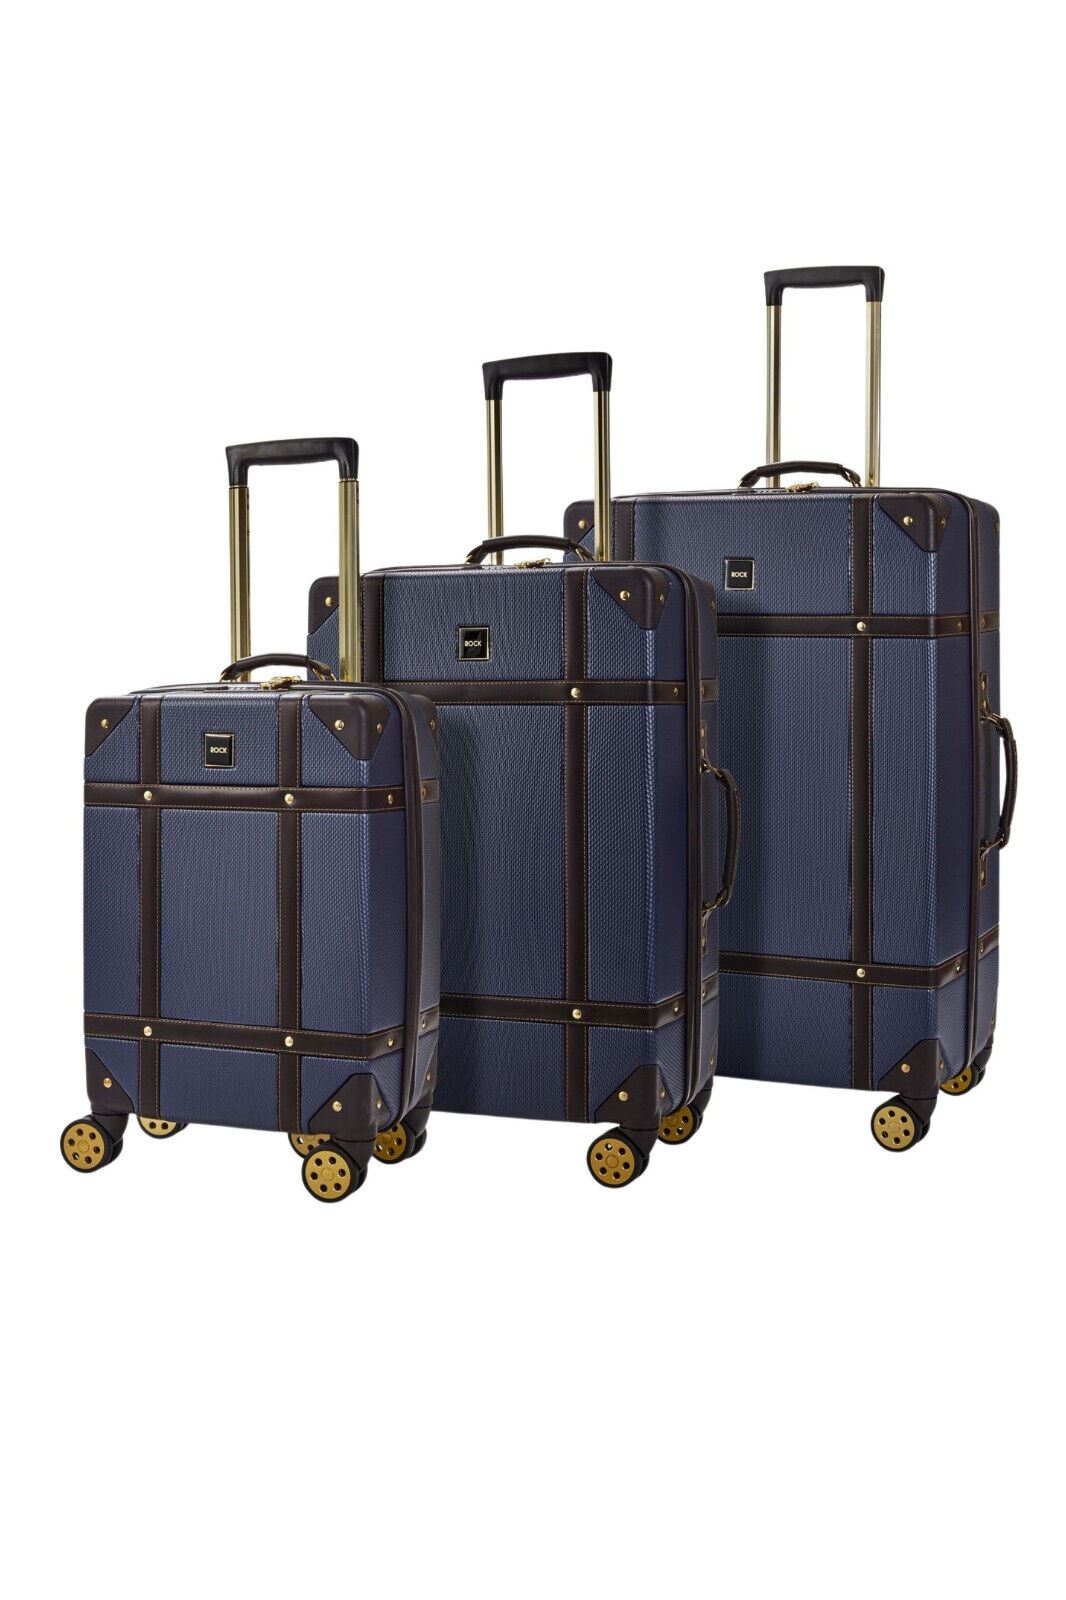 Hard Shell Navy Blue Luggage Suitcase Set Trunk Cabin Travel Bags